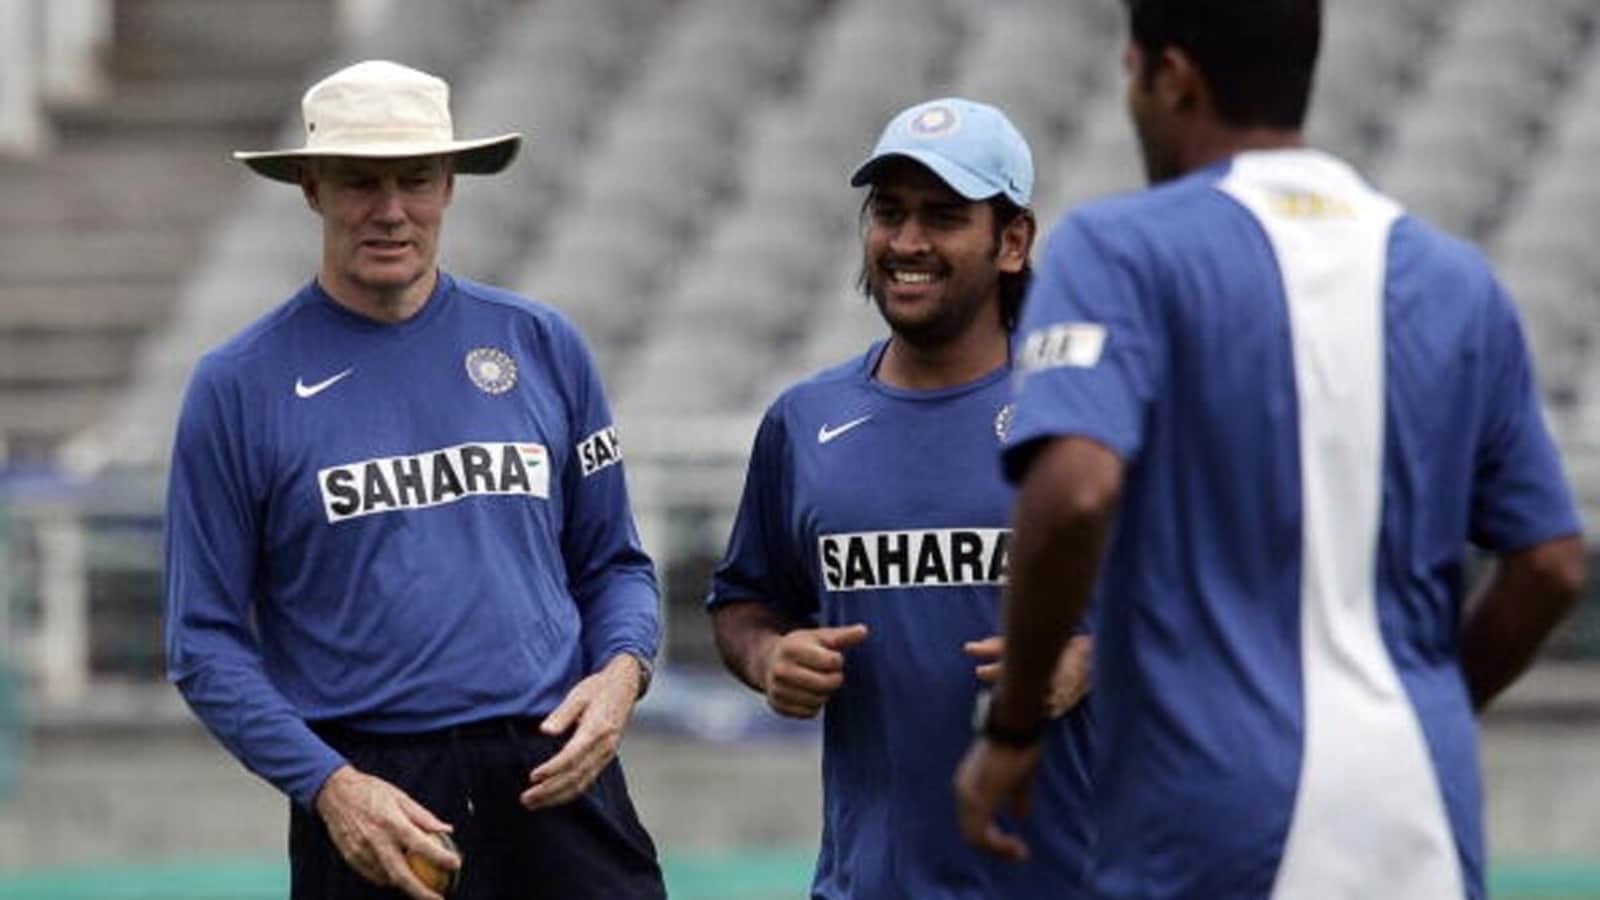 Hindi News: Greg Chappell points out one quality of MS Dhoni that ‘set him apart from many of his peers’